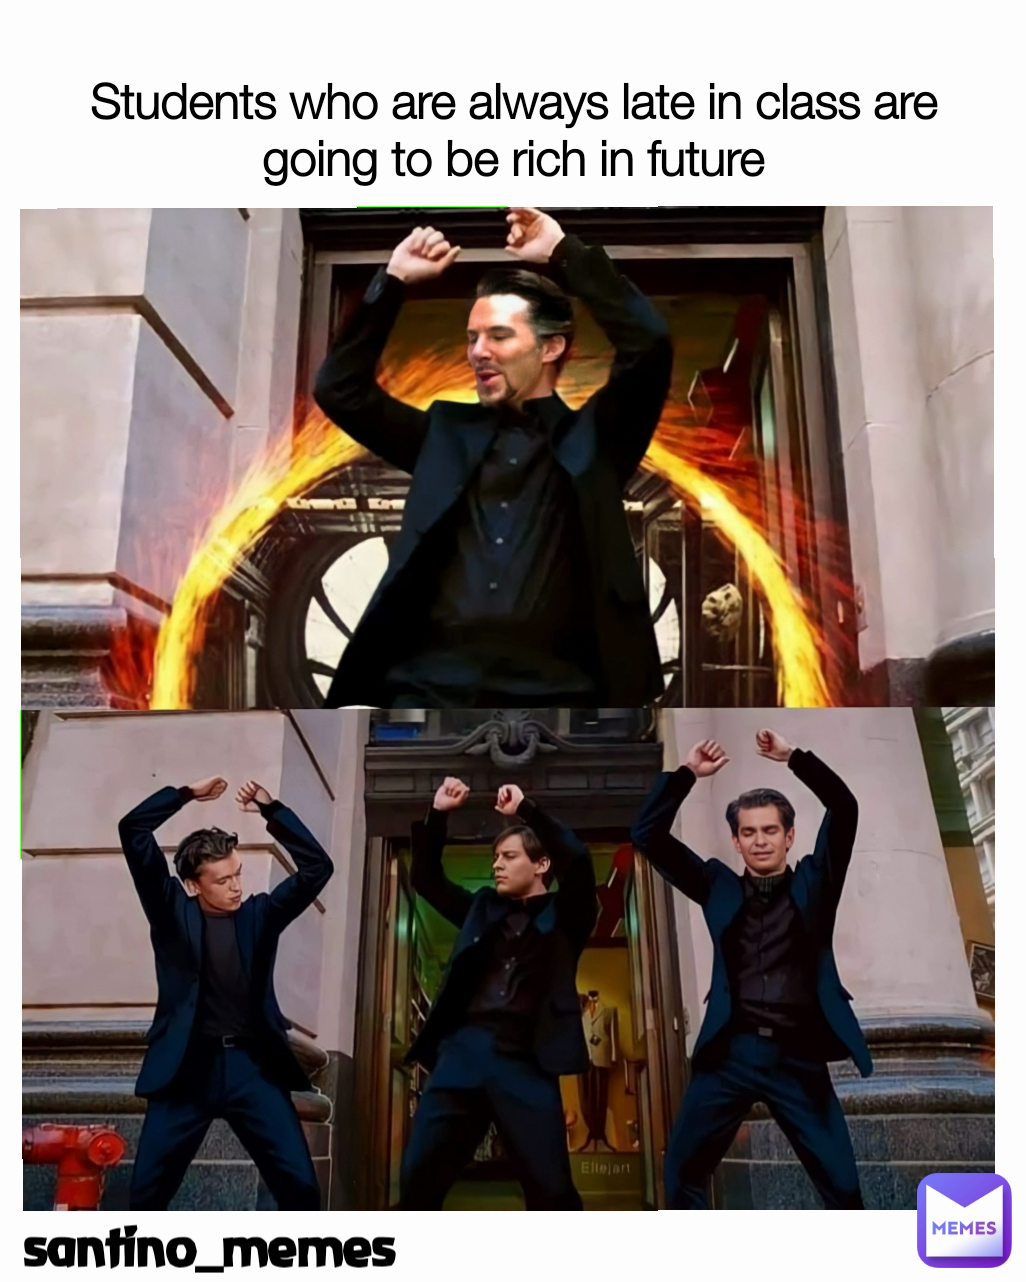 santino_memes Students who are always late in class are going to be rich in future